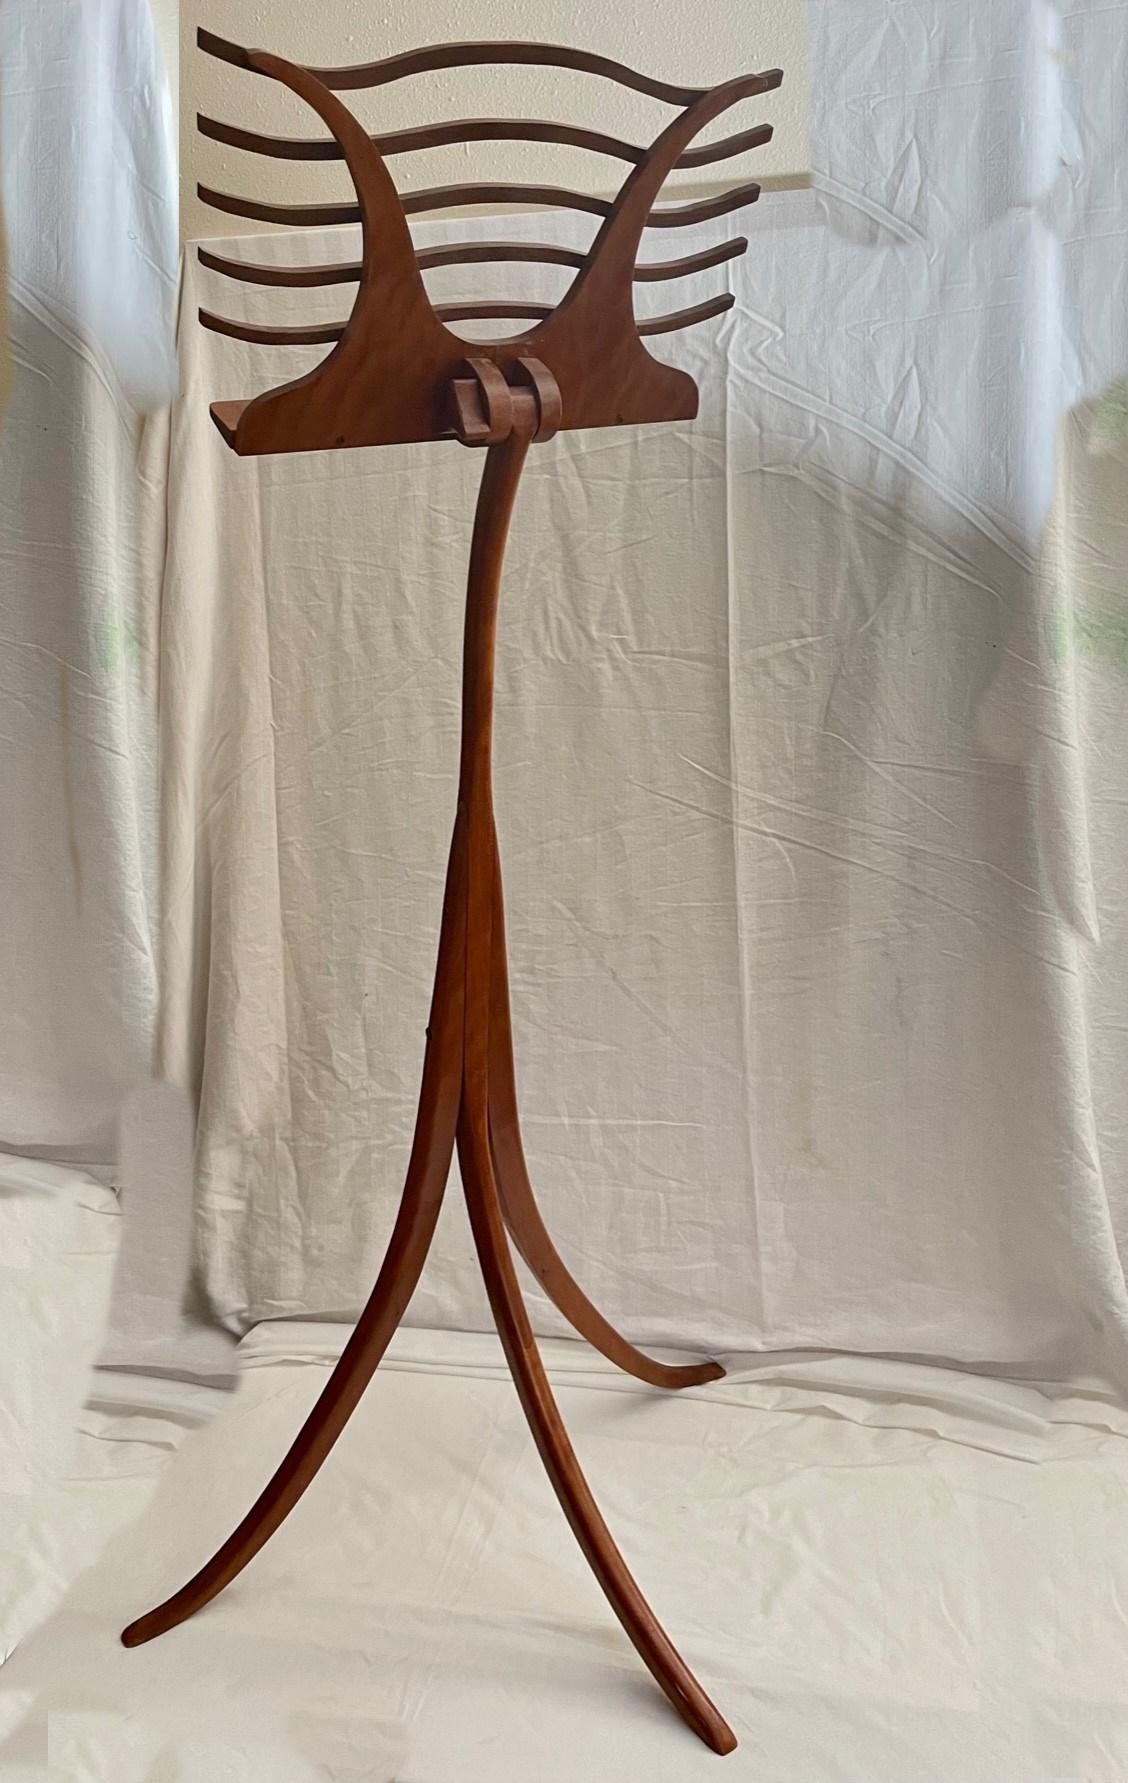 American Studio Craft Lectern / Music Stand Wendell Castle Style In Good Condition For Sale In Vero Beach, FL